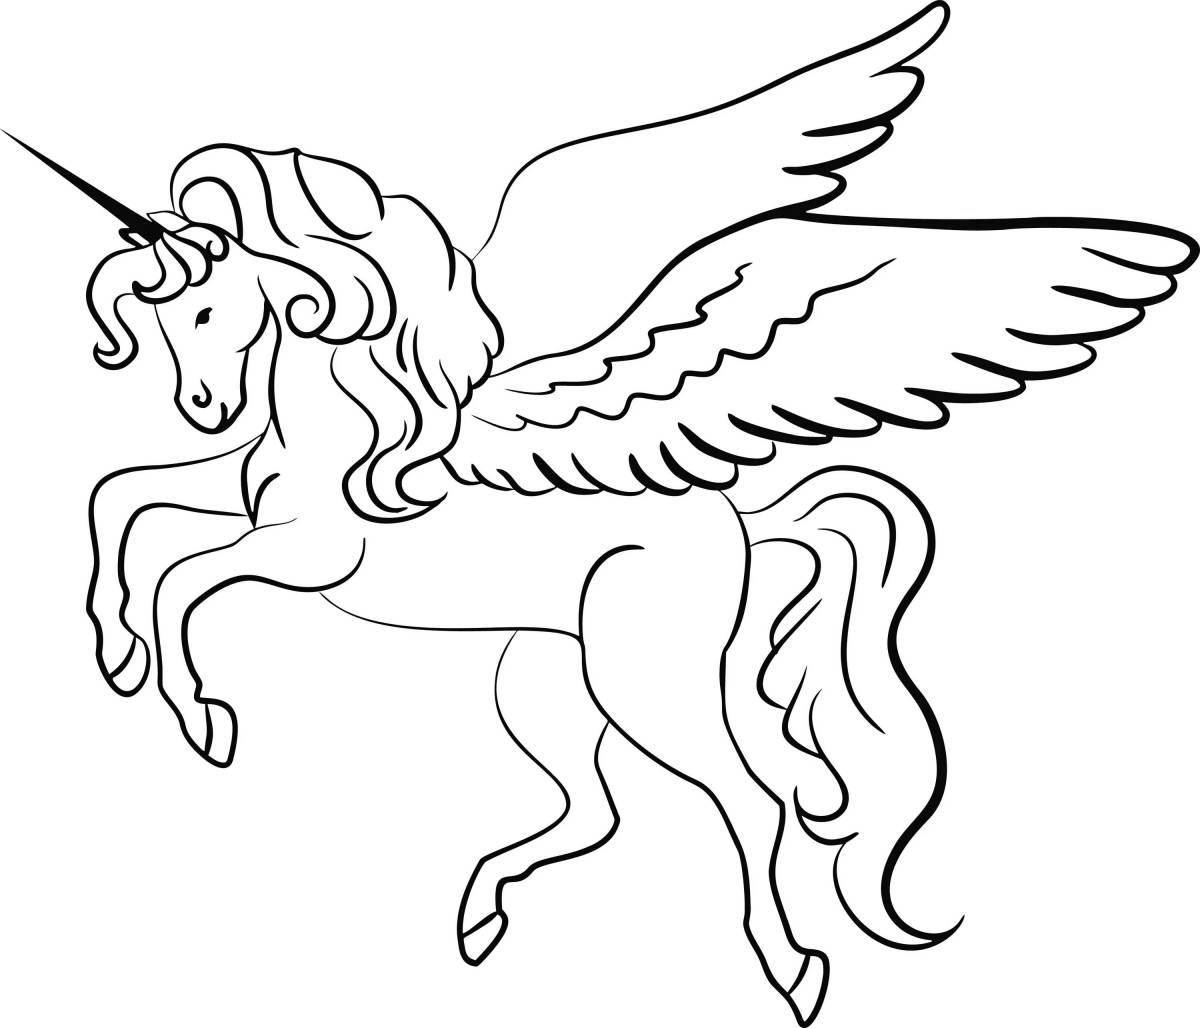 Coloring book unicorn with wings for kids